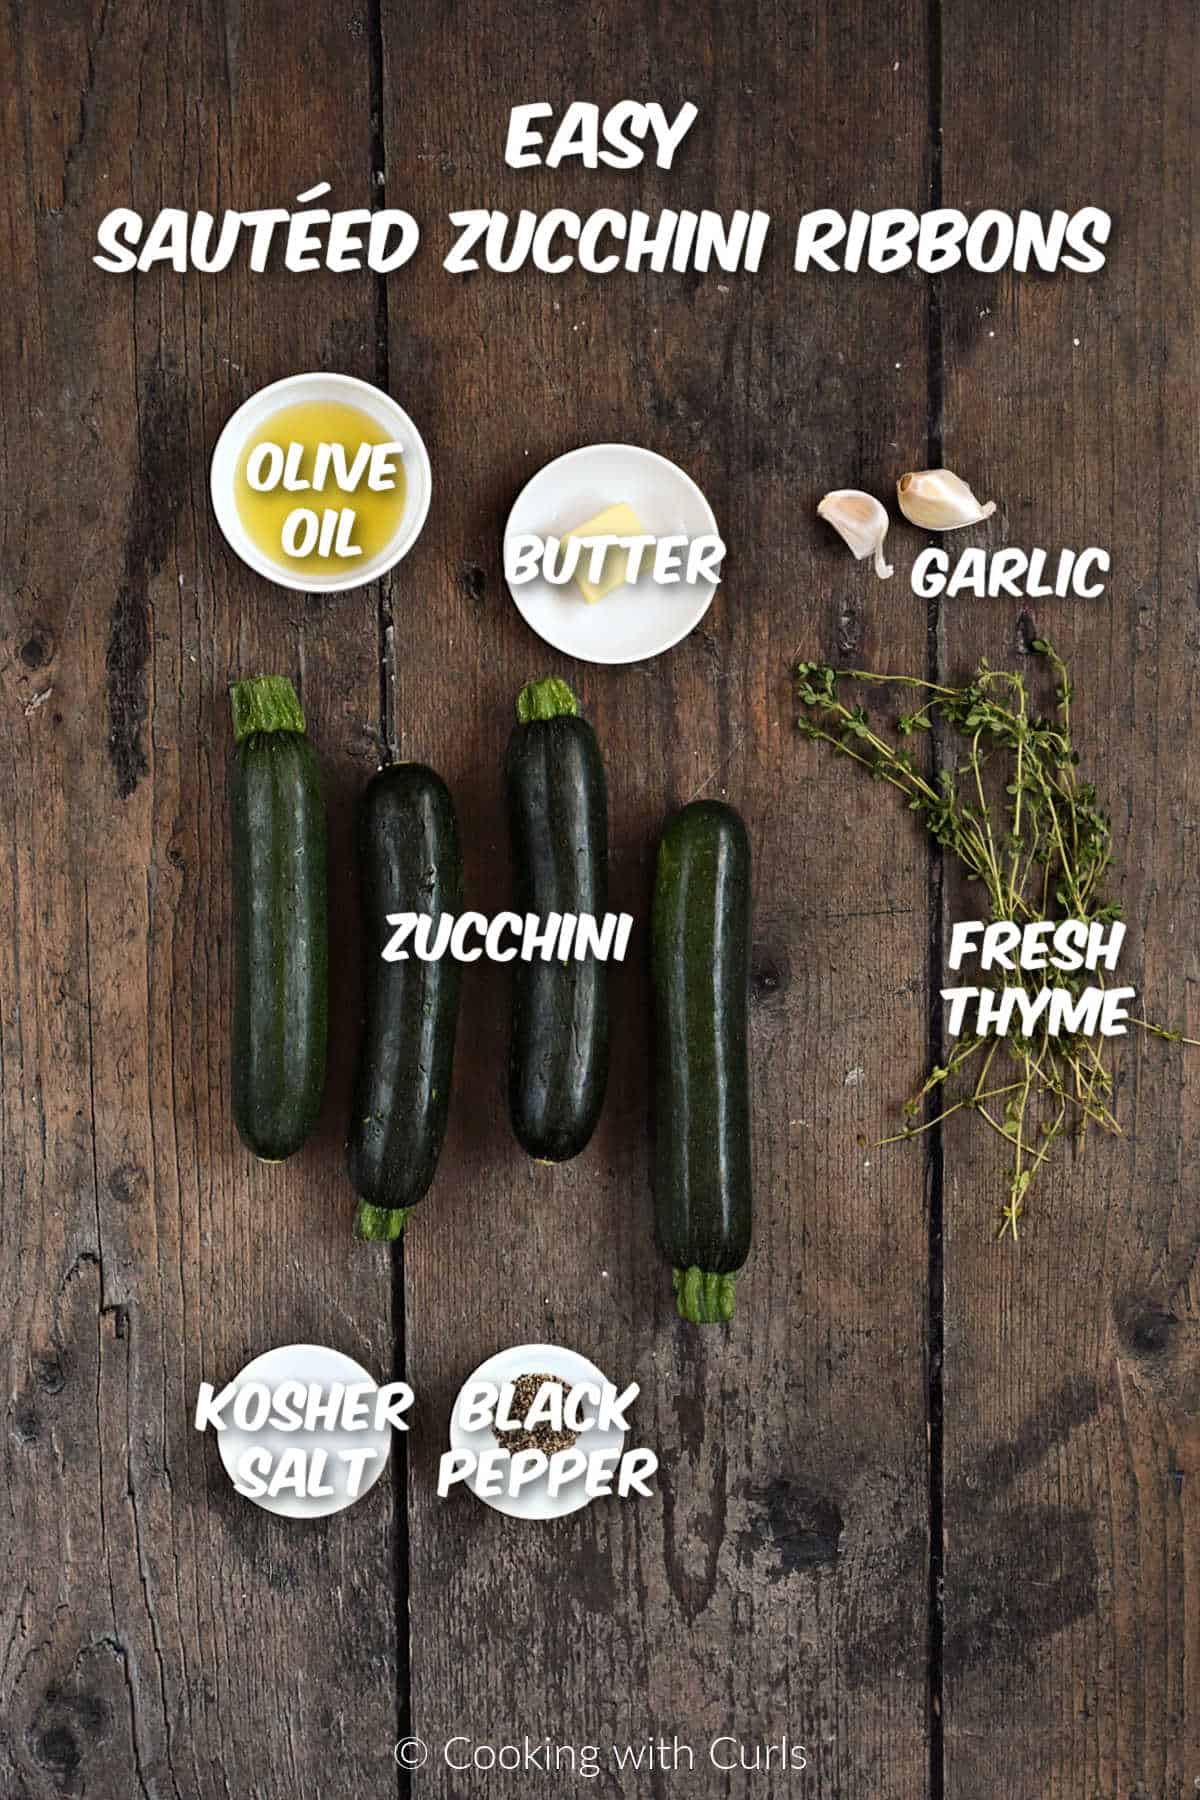 Ingredients needed to make sauteed zucchini ribbons.